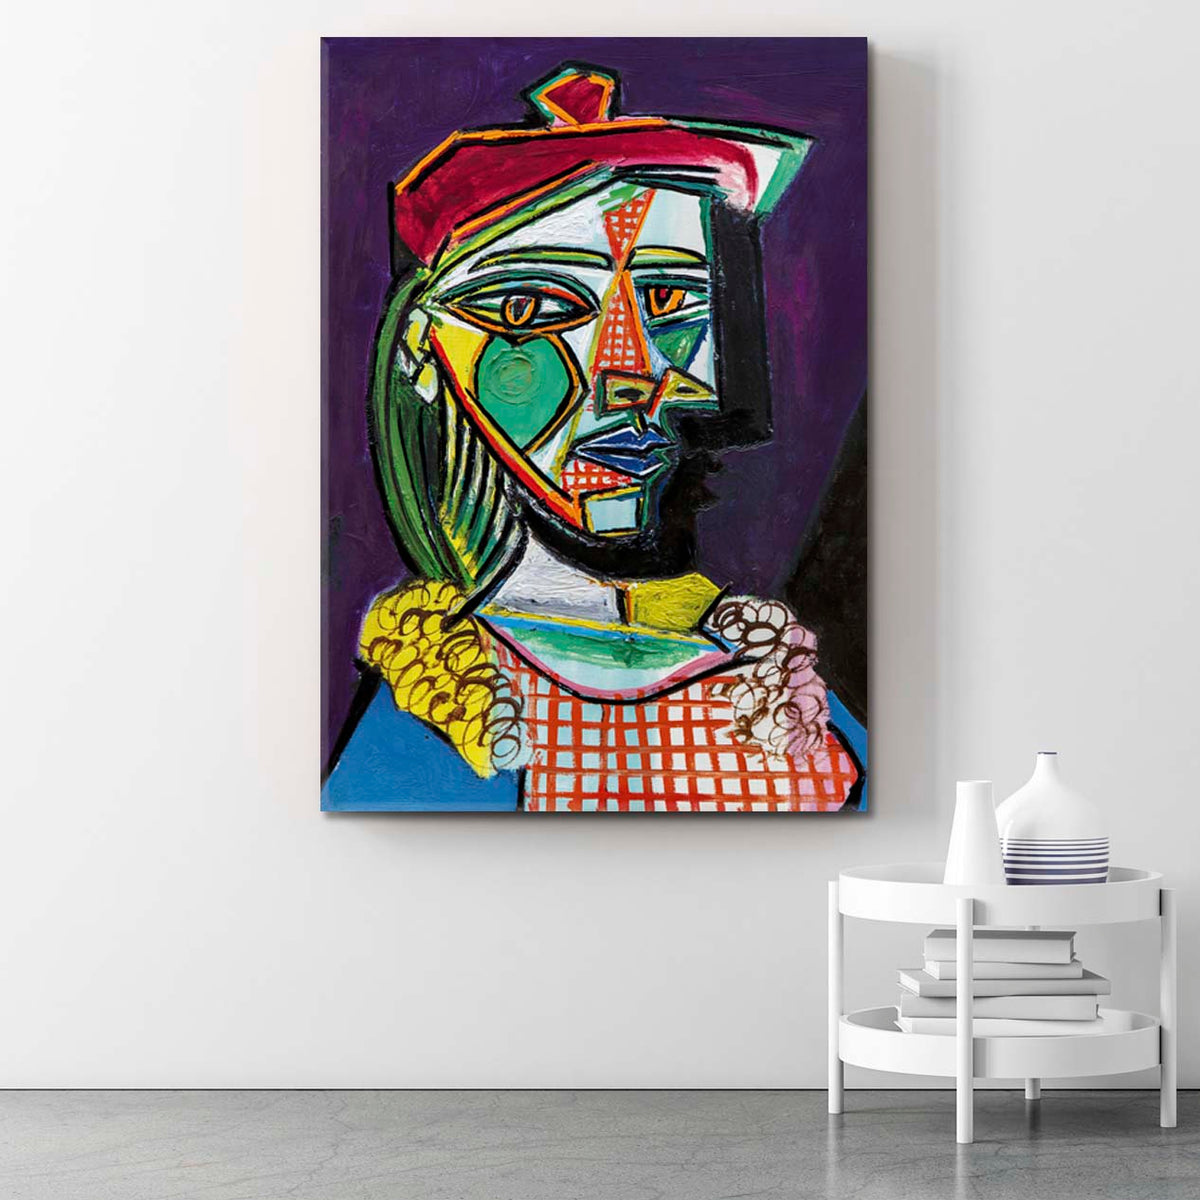 INSPIRED BY PABLO PICASSO Woman in Beret Abstract Cubism Cubist Trendy Large Art Print Artesty 1 Panel 16"x24" 